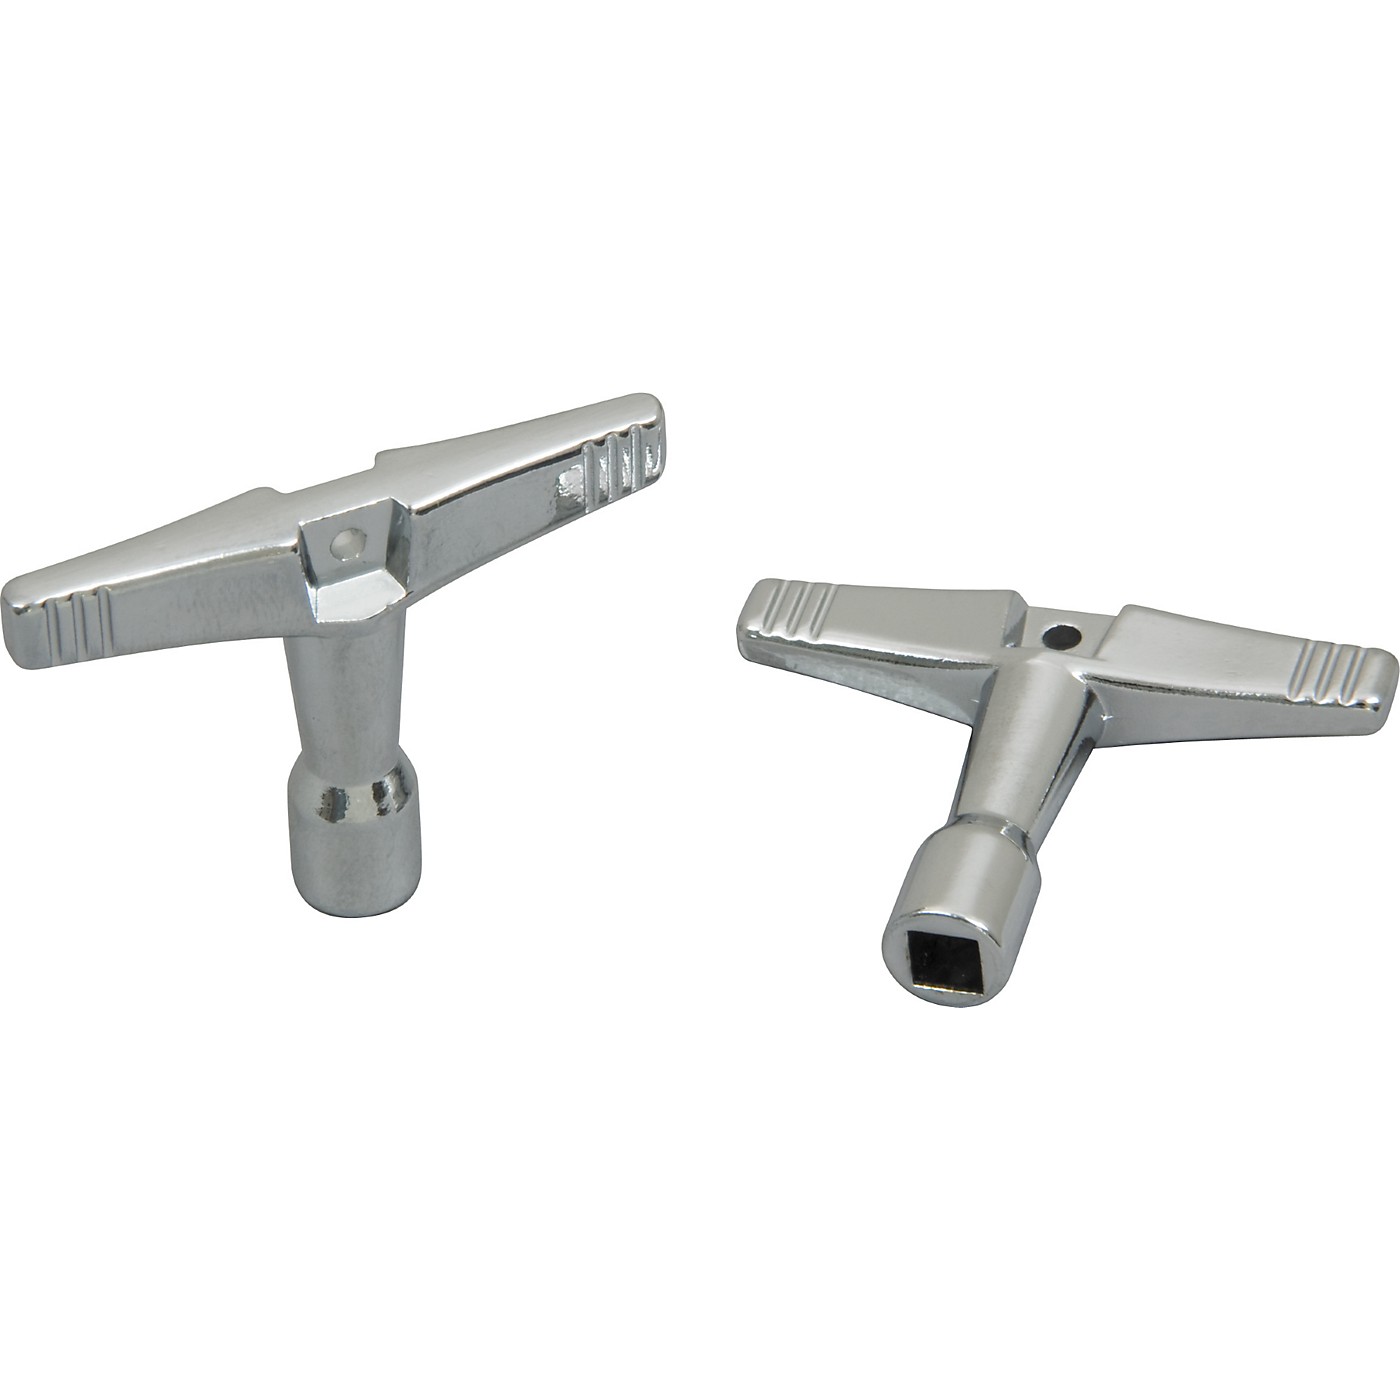 Sound Percussion Labs SPA10 Drum Key (2 Pack) thumbnail